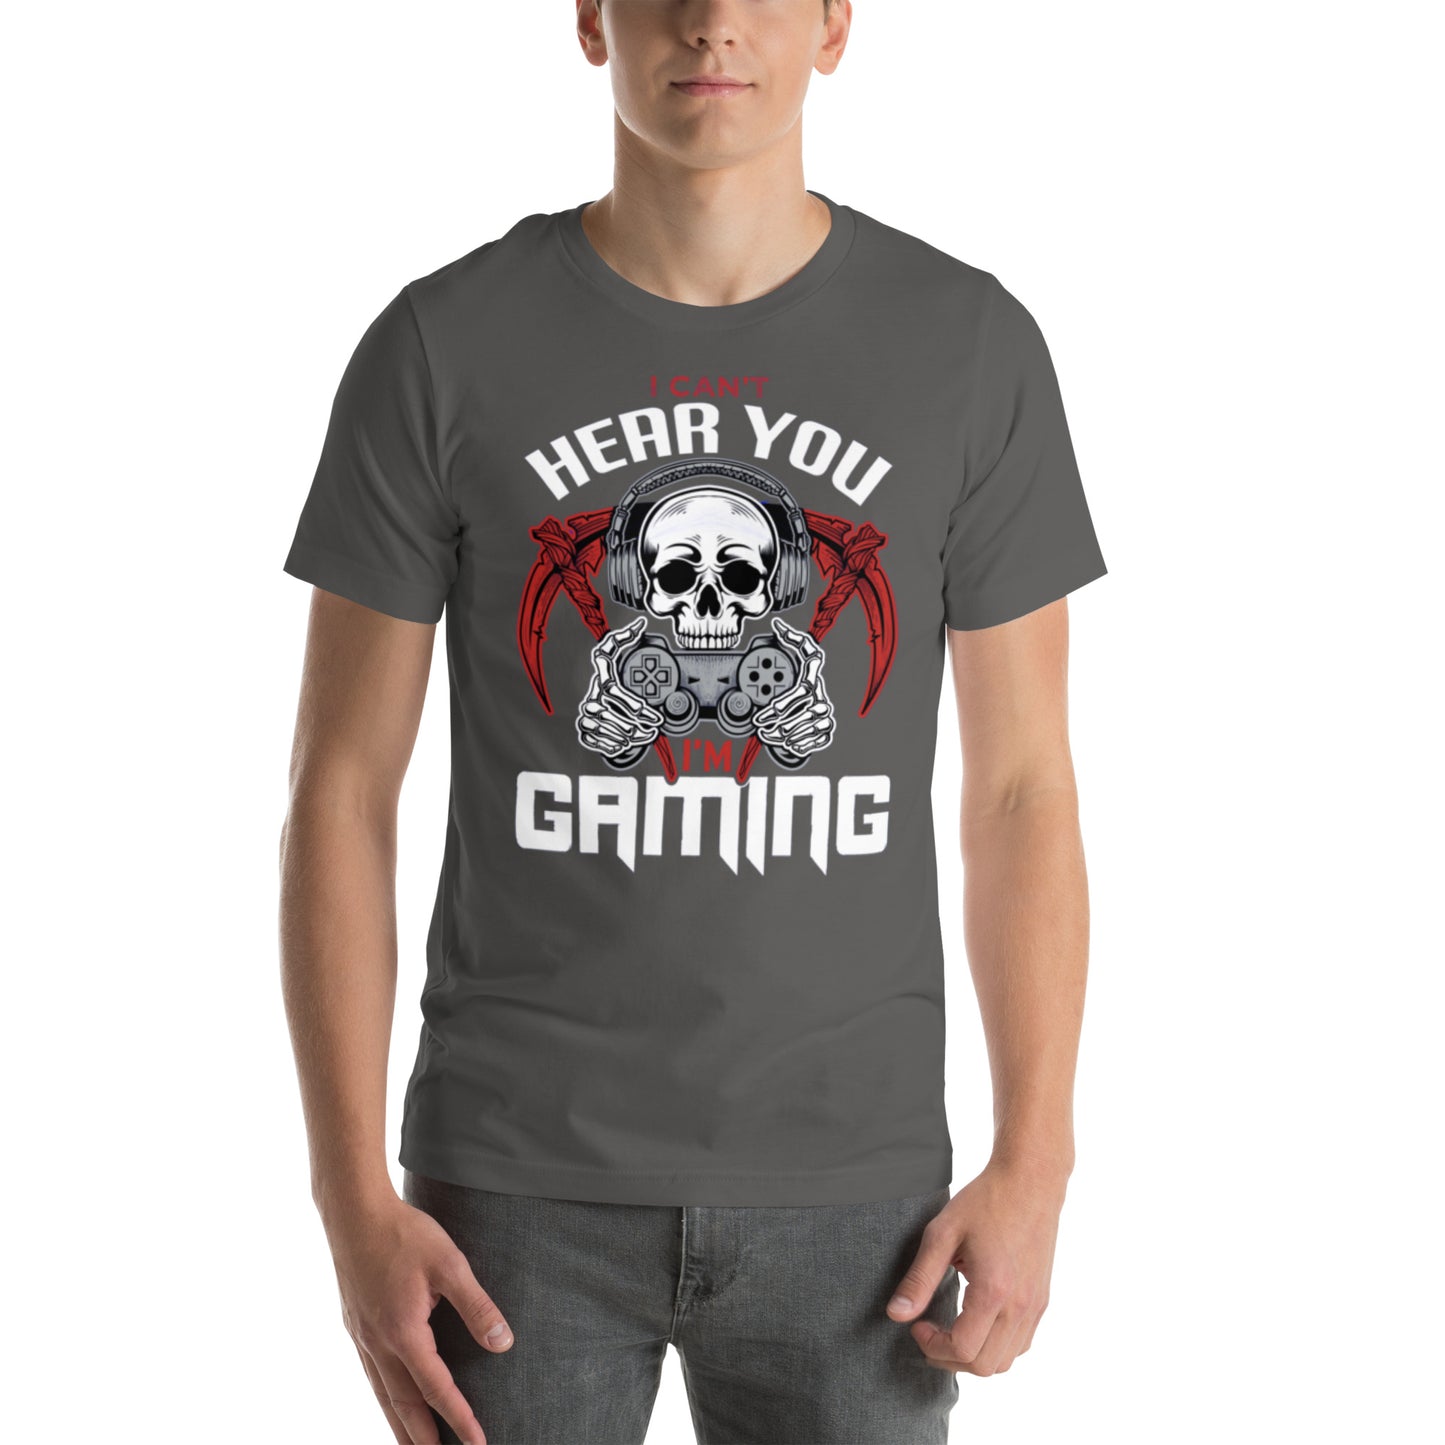 I Can't Hear You I'm Gaming Unisex t-shirt